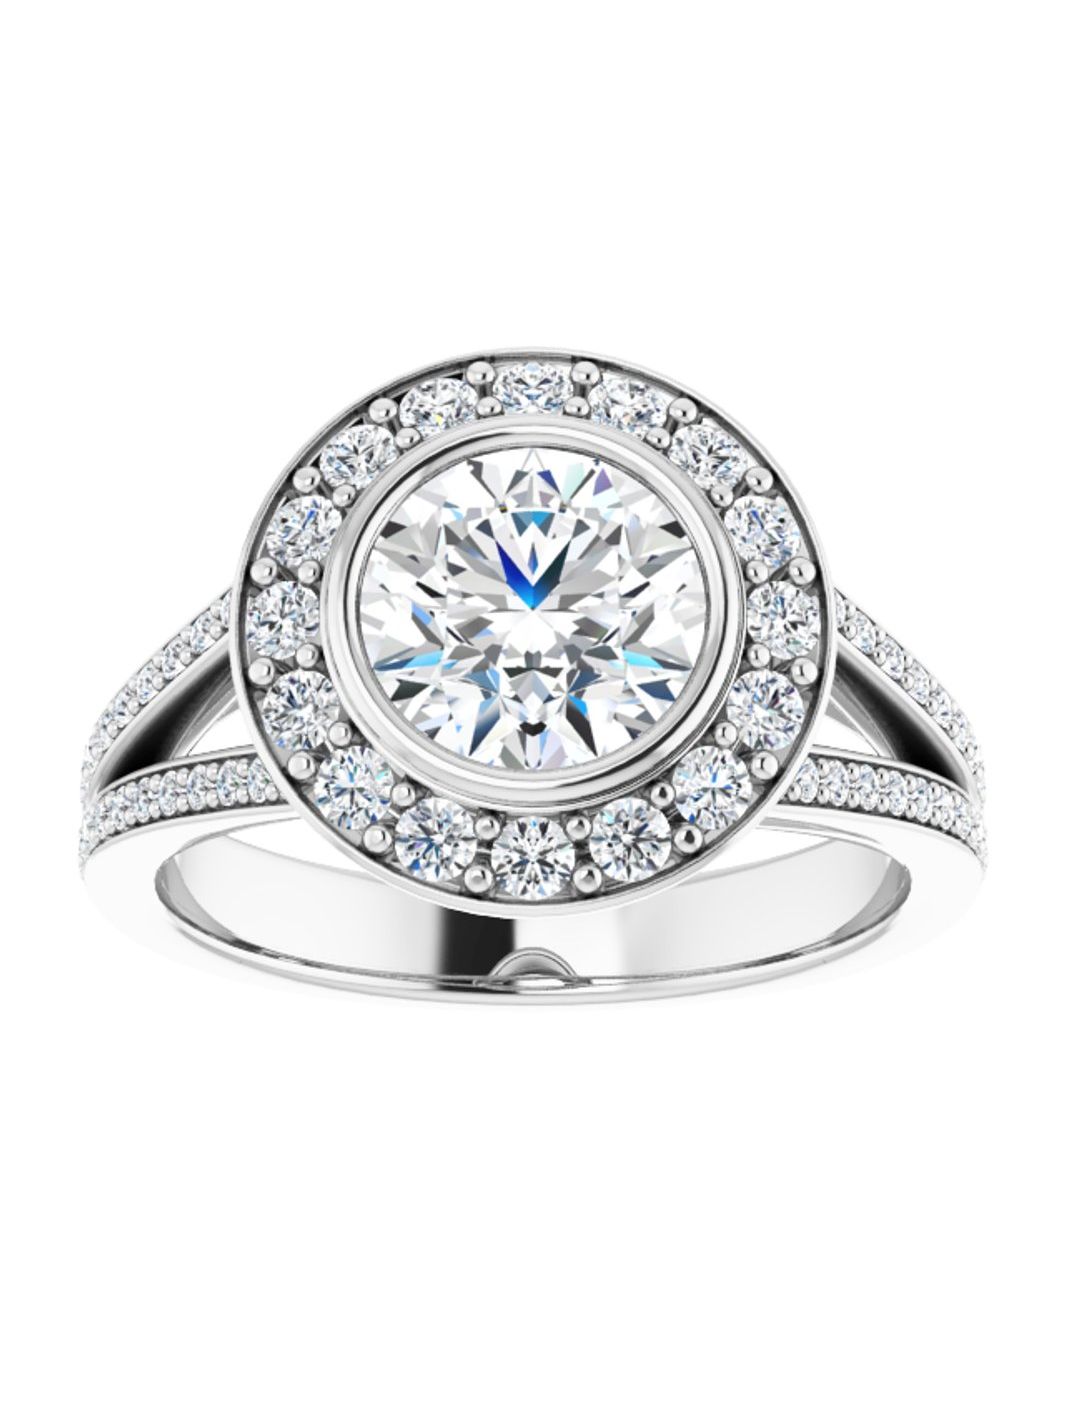 Are Halo Engagement Rings Tacky?